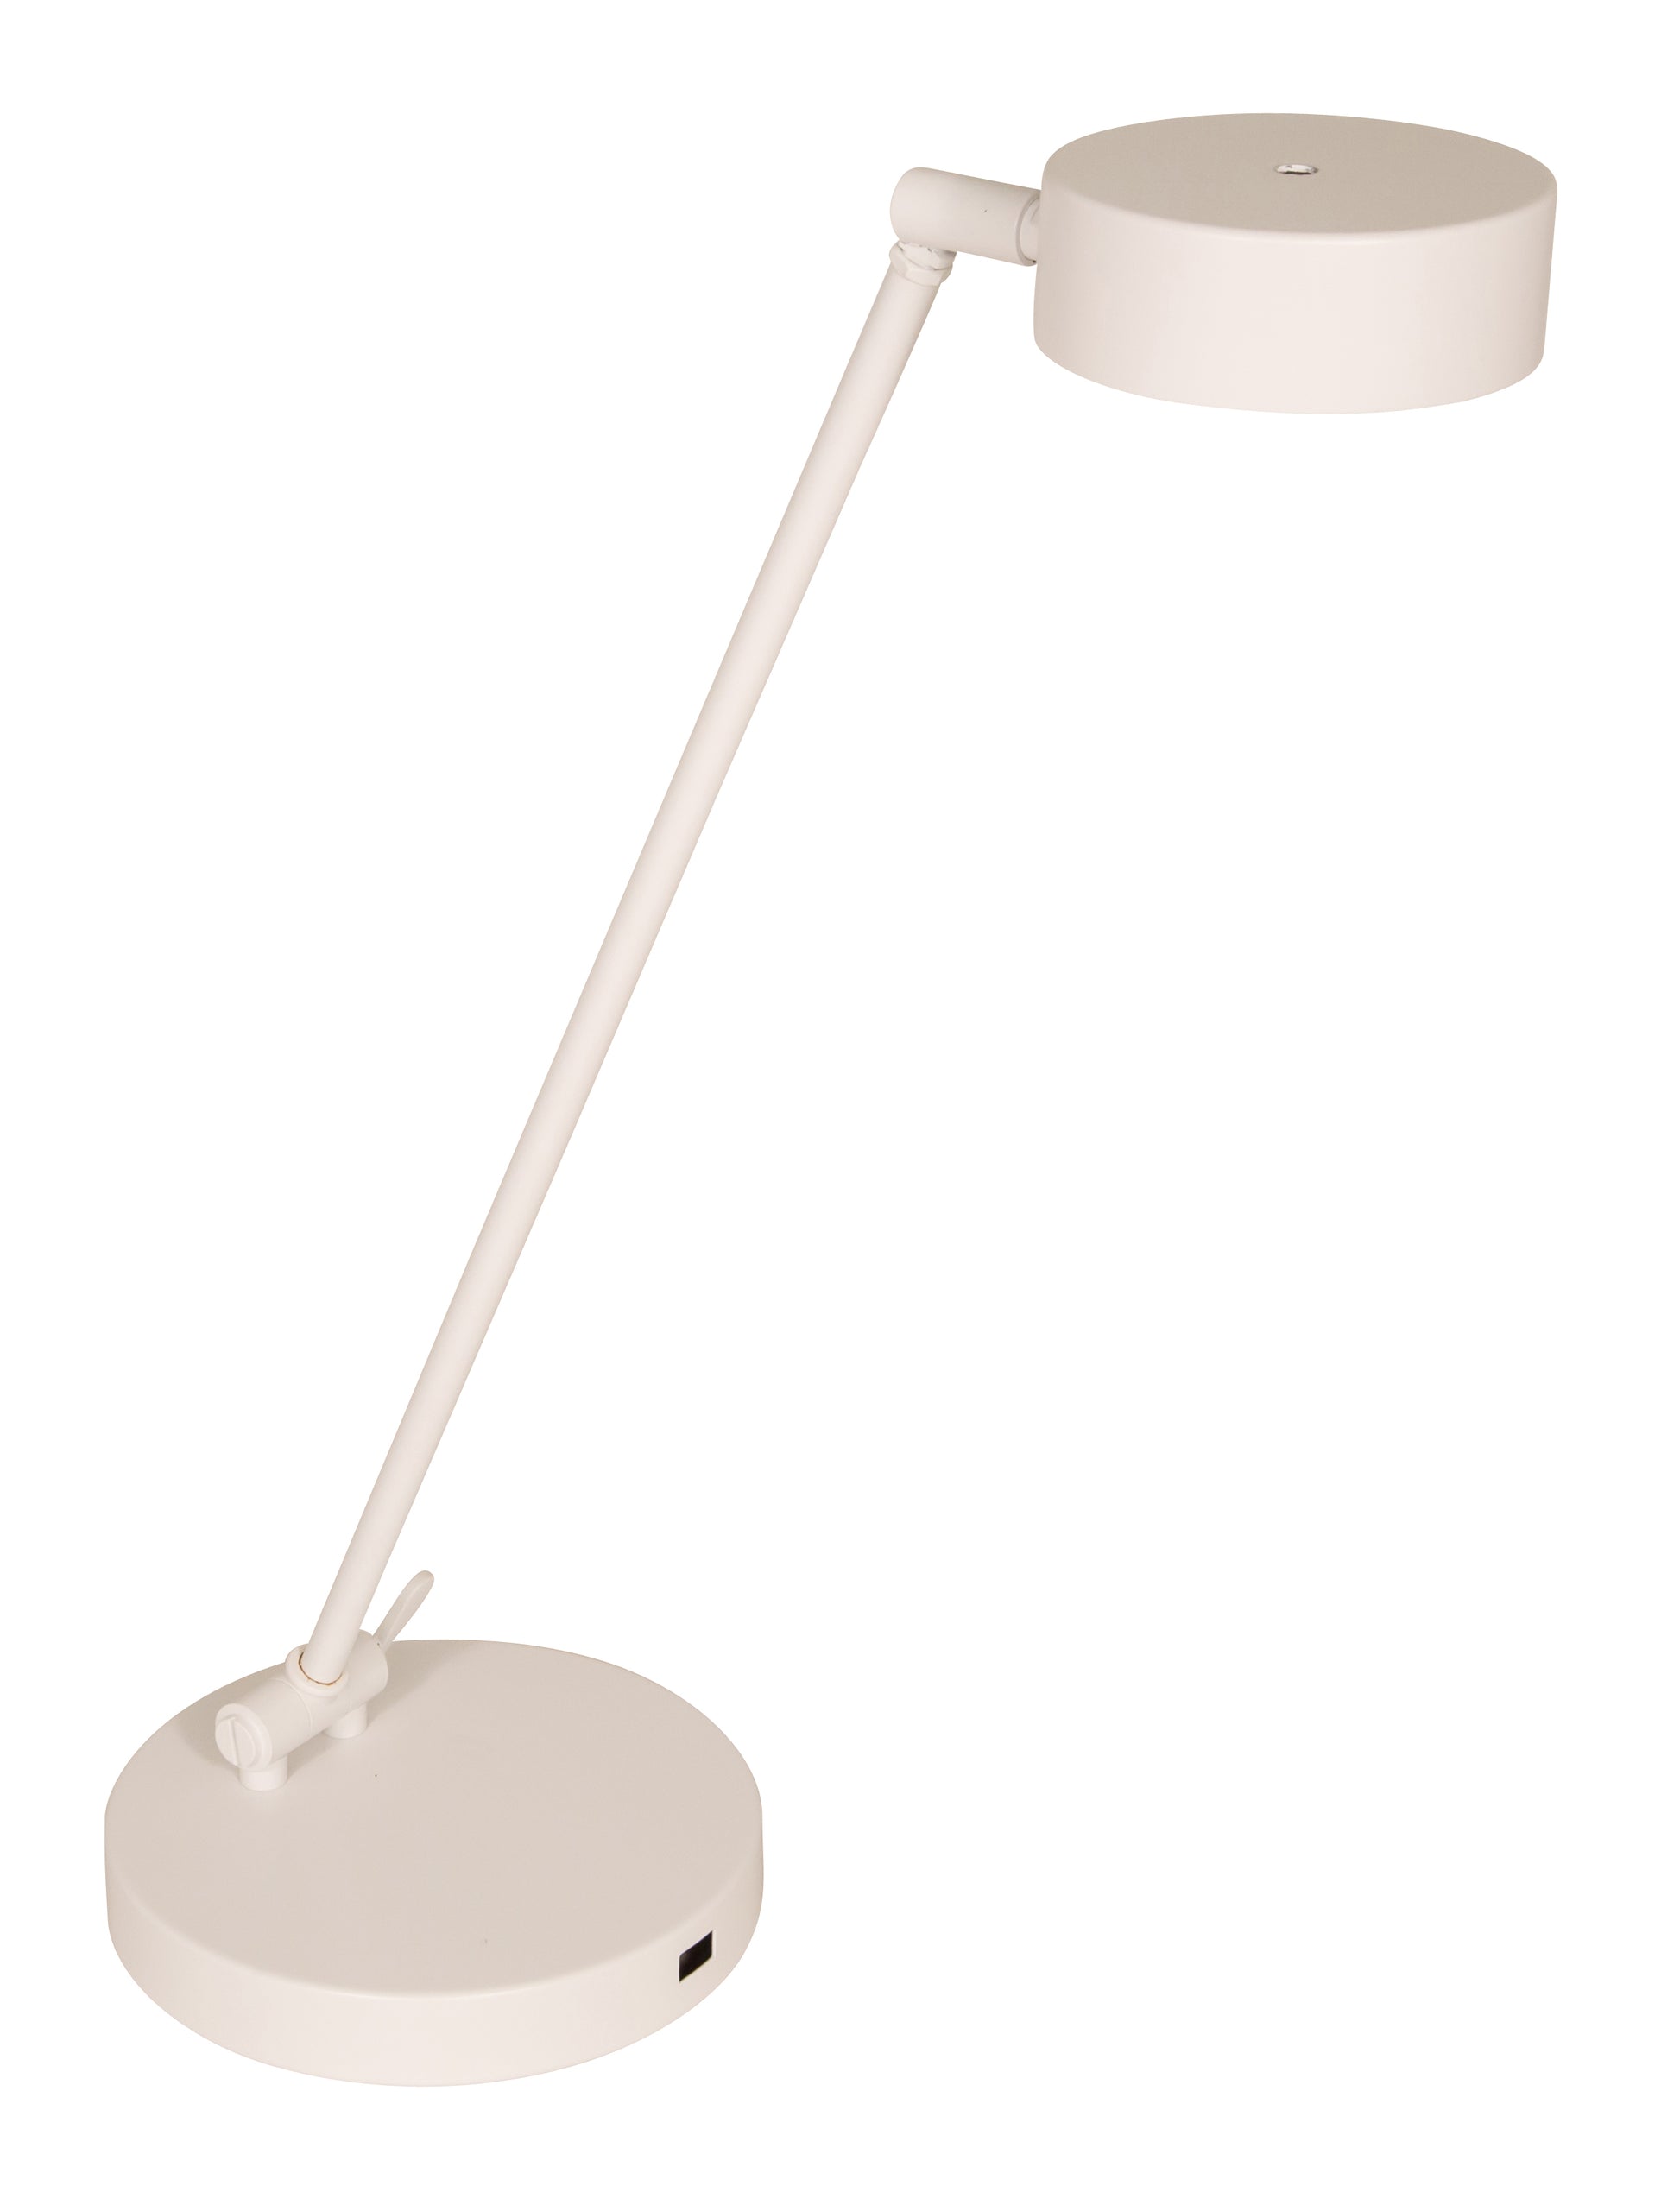 House of Troy Generation adjustable LED table lamp in white G450-WT